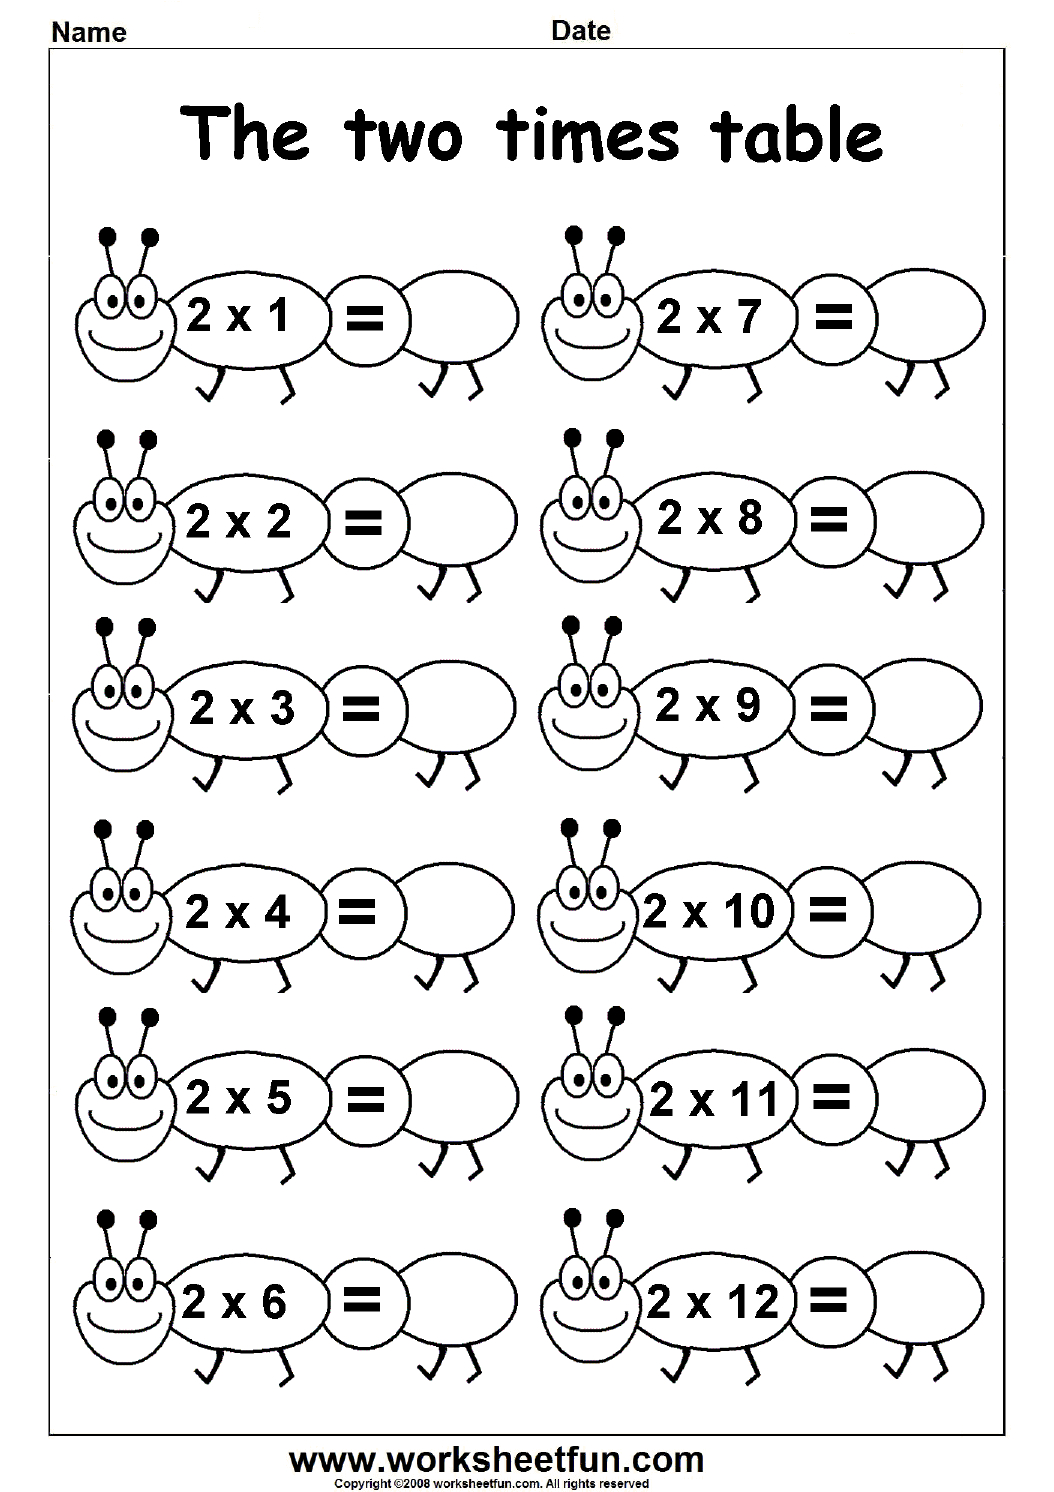 Multiplication Times Tables Worksheets – 2, 3, 4, 5, 6 &amp;amp; 7 pertaining to Multiplication Worksheets 2 And 3 Times Tables